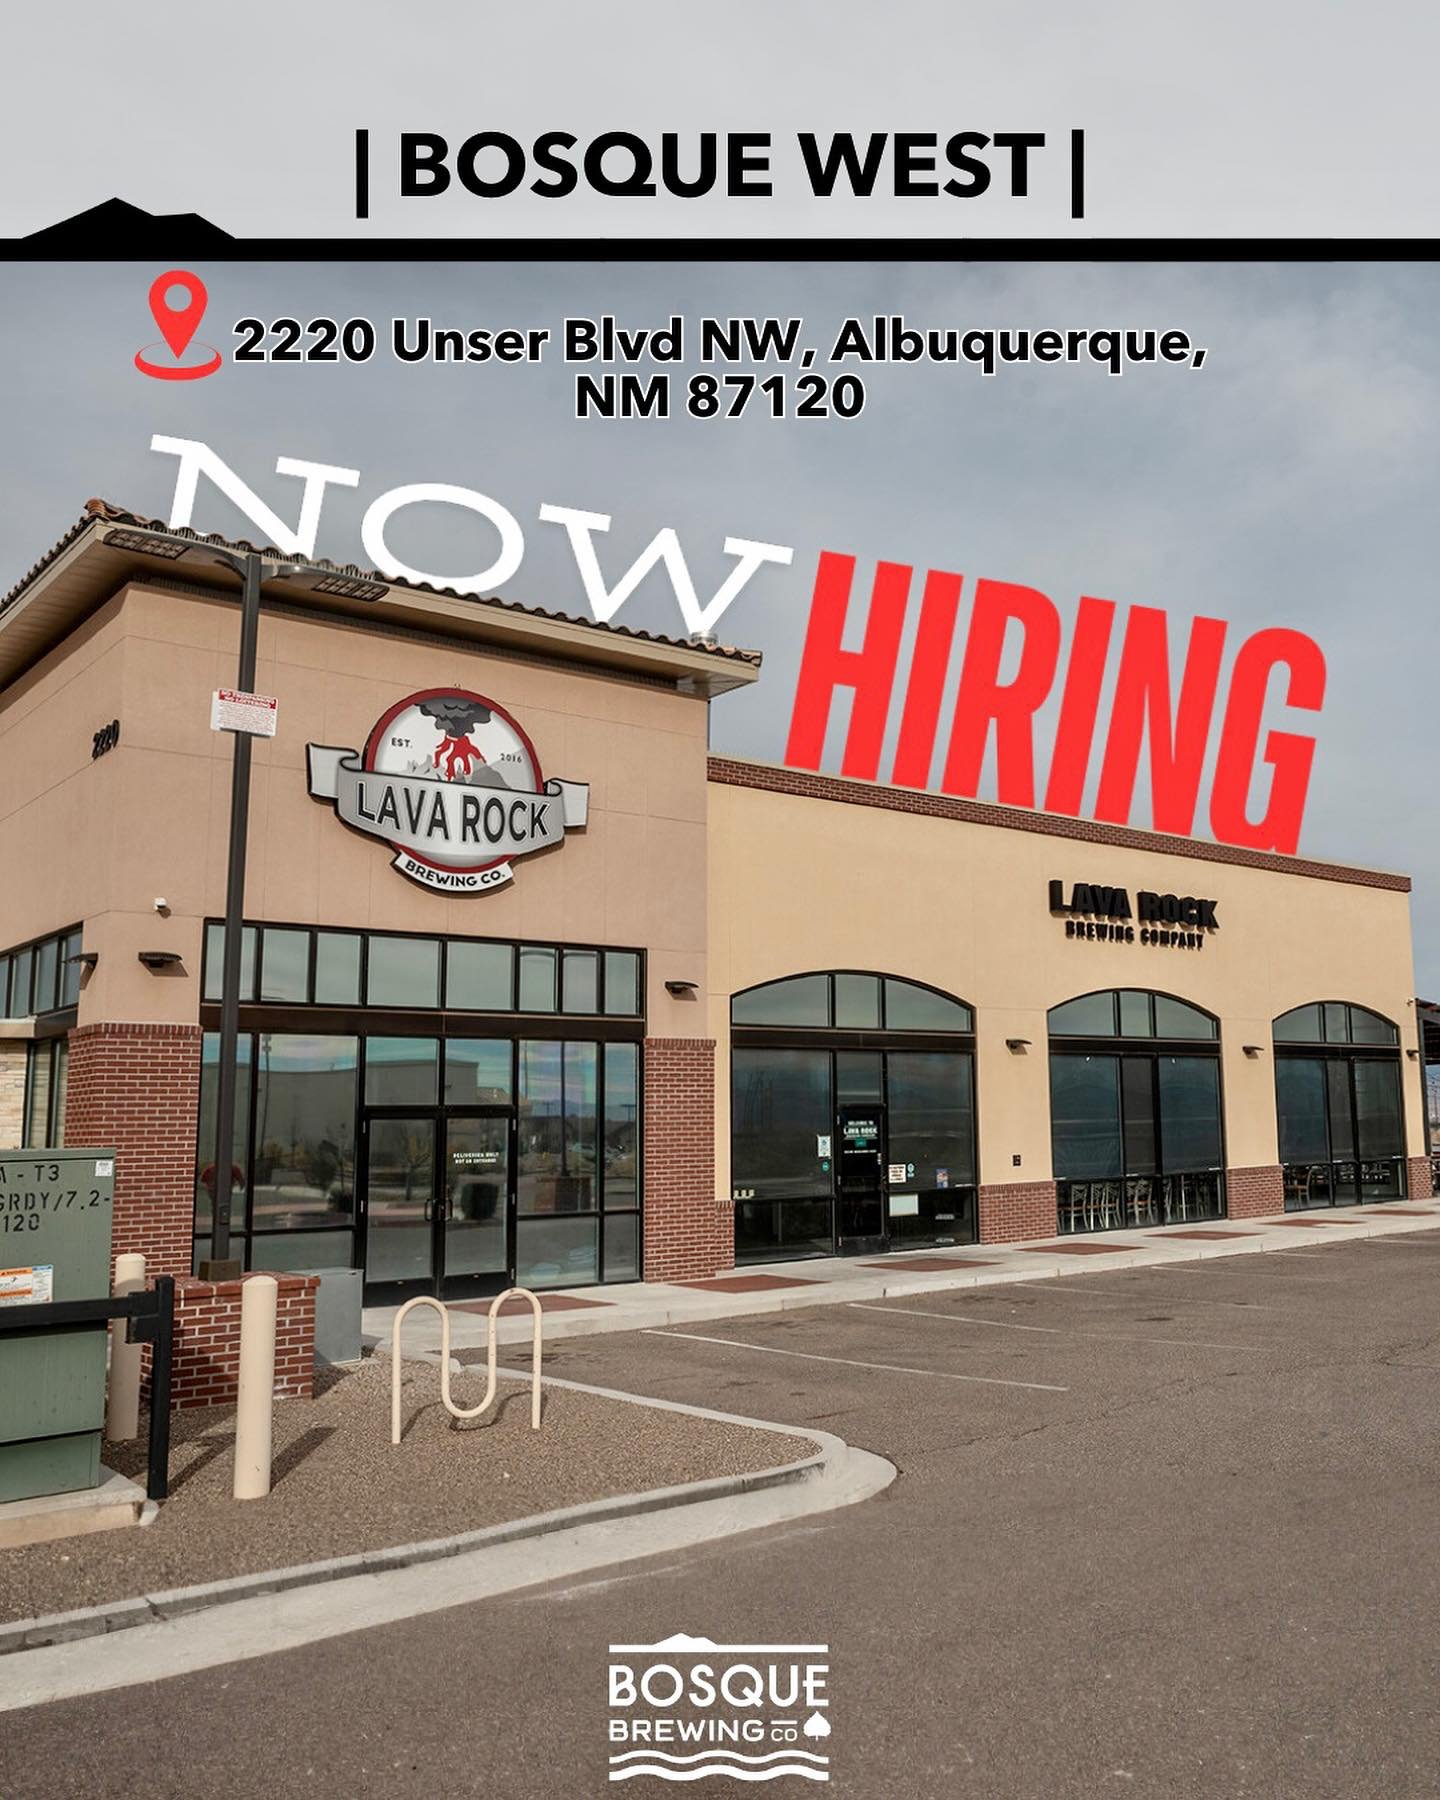 NOW HIRING AT BOSQUE WEST🚨

We&rsquo;re getting extremely close to opening our doors at Bosque West. As the final renovations continue, we are excited to announce that we have officially opened hiring for this location.  We are looking for back-of-h